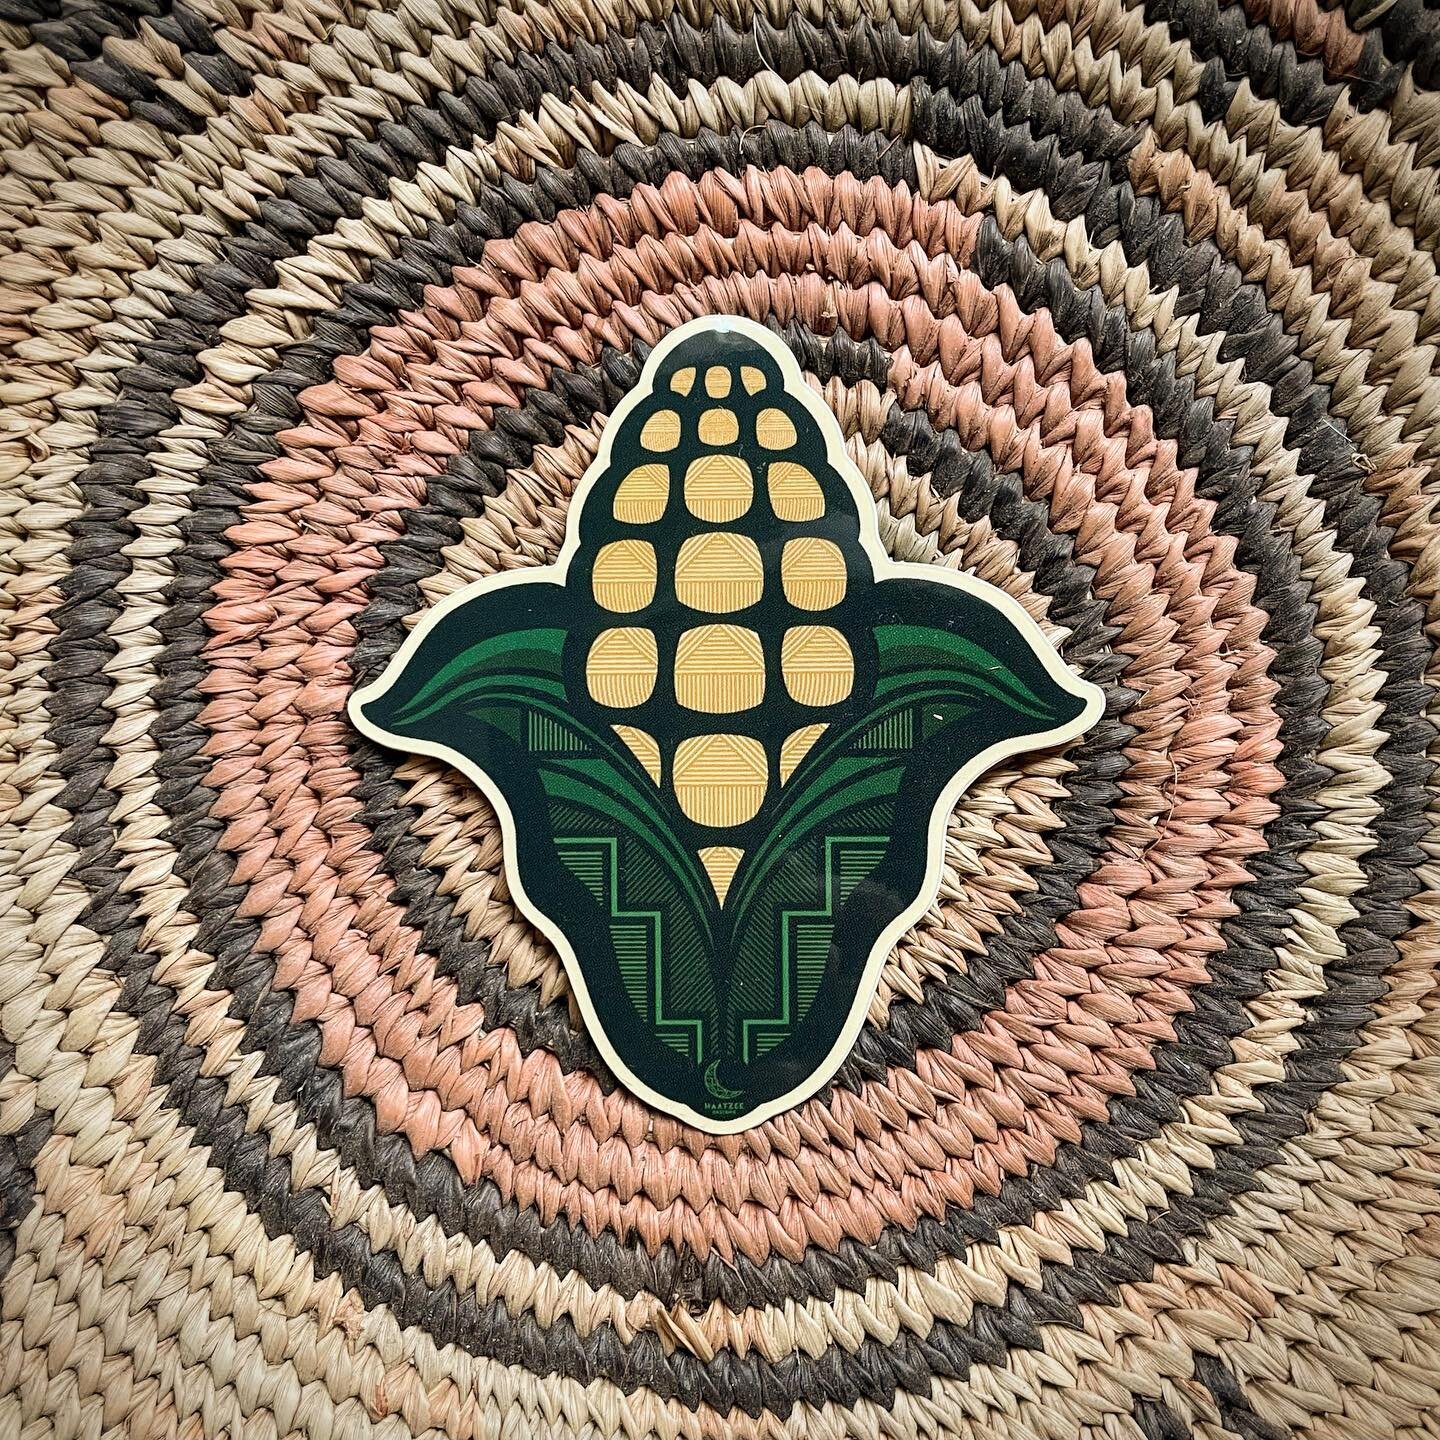 Corn Clan Sticker is now available online (via shop link in bio) 🌽🌱✨

Corn has a many meanings to our Indigenous communities. From ancestral (and current) food source to clan origins and spiritual significance - this sticker represents these meanin